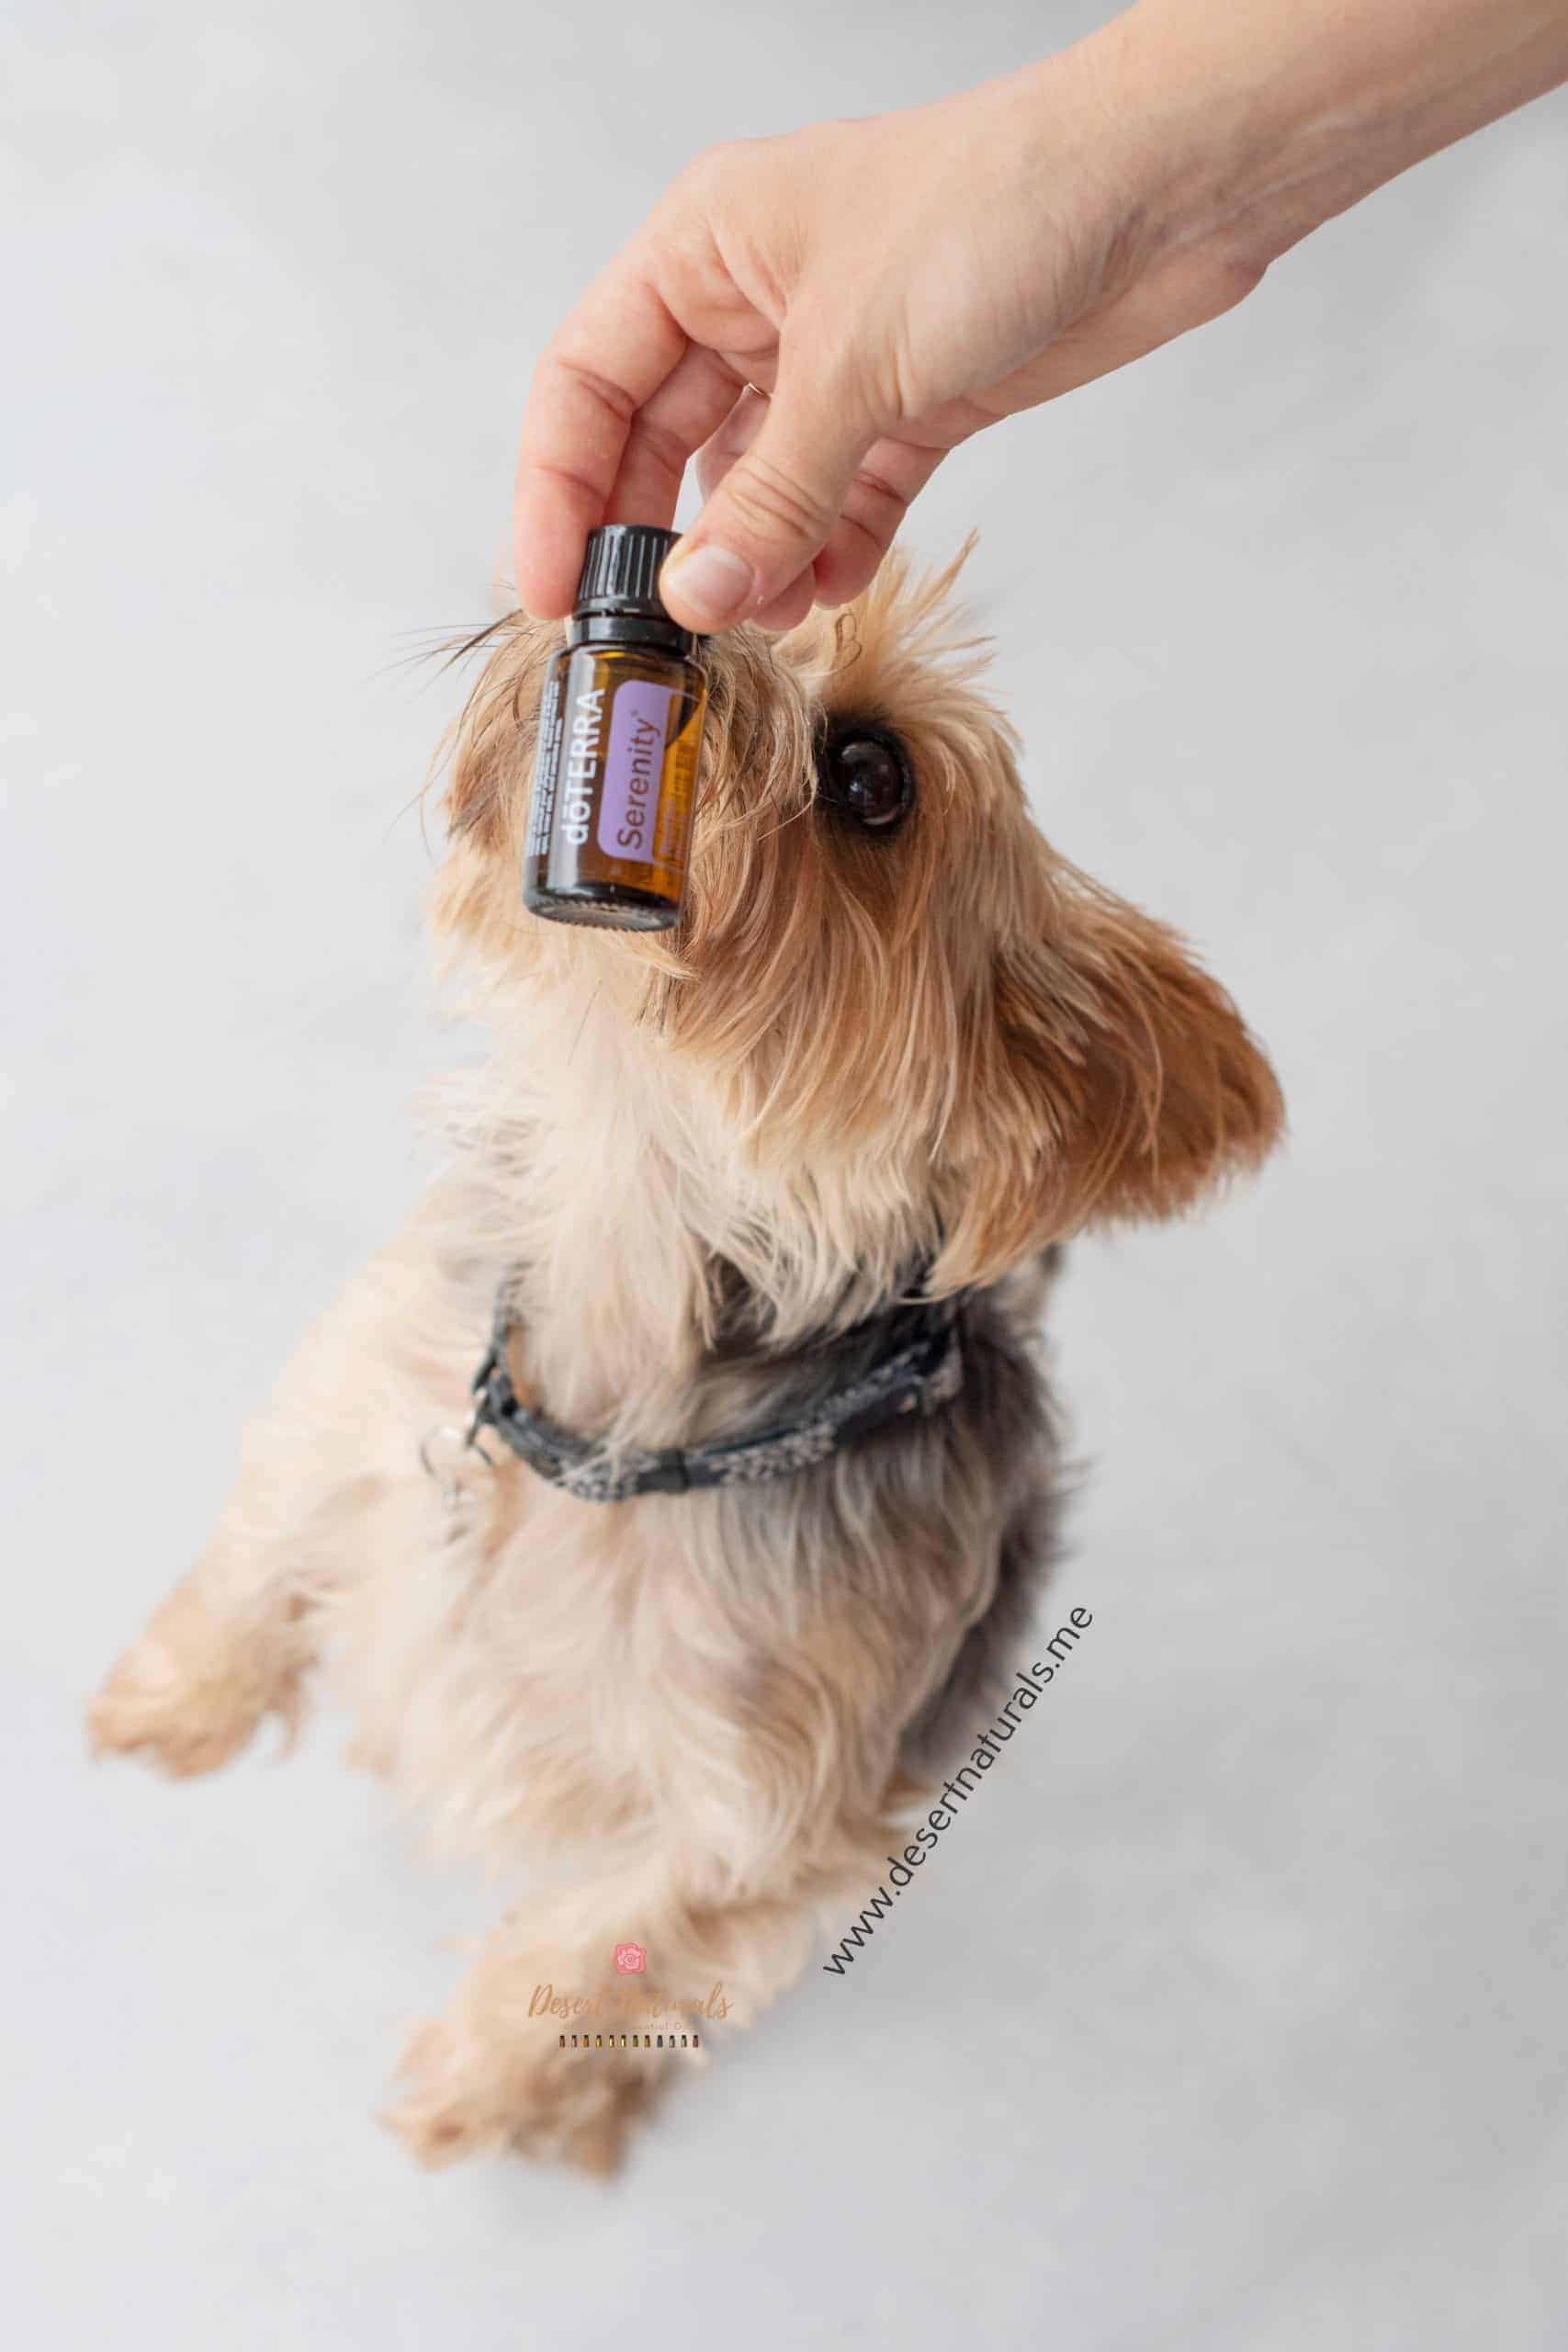 doTERRA essential oils like Serenity are safe for dogs